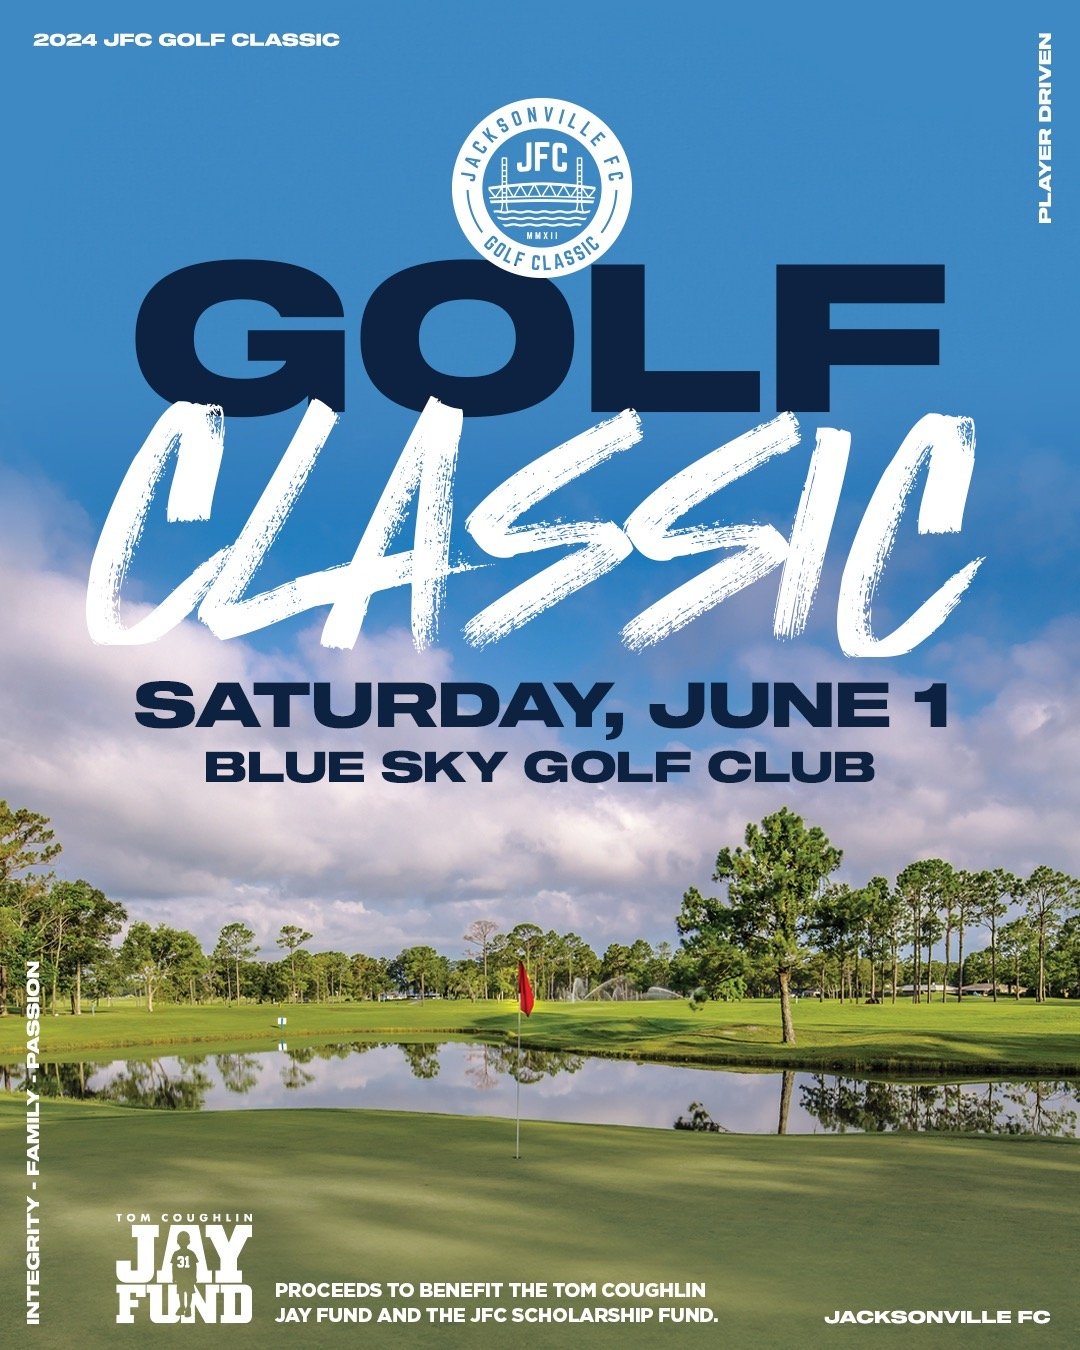 Join us for The 2024 Jacksonville FC Golf Classic on June 1st at Blue Sky Golf Club.

Your participation will benefit two important causes: the Tom Coughlin Jay Fund and the JFC Scholarship Fund.

Sign up now to make a difference. Let's tee off toget